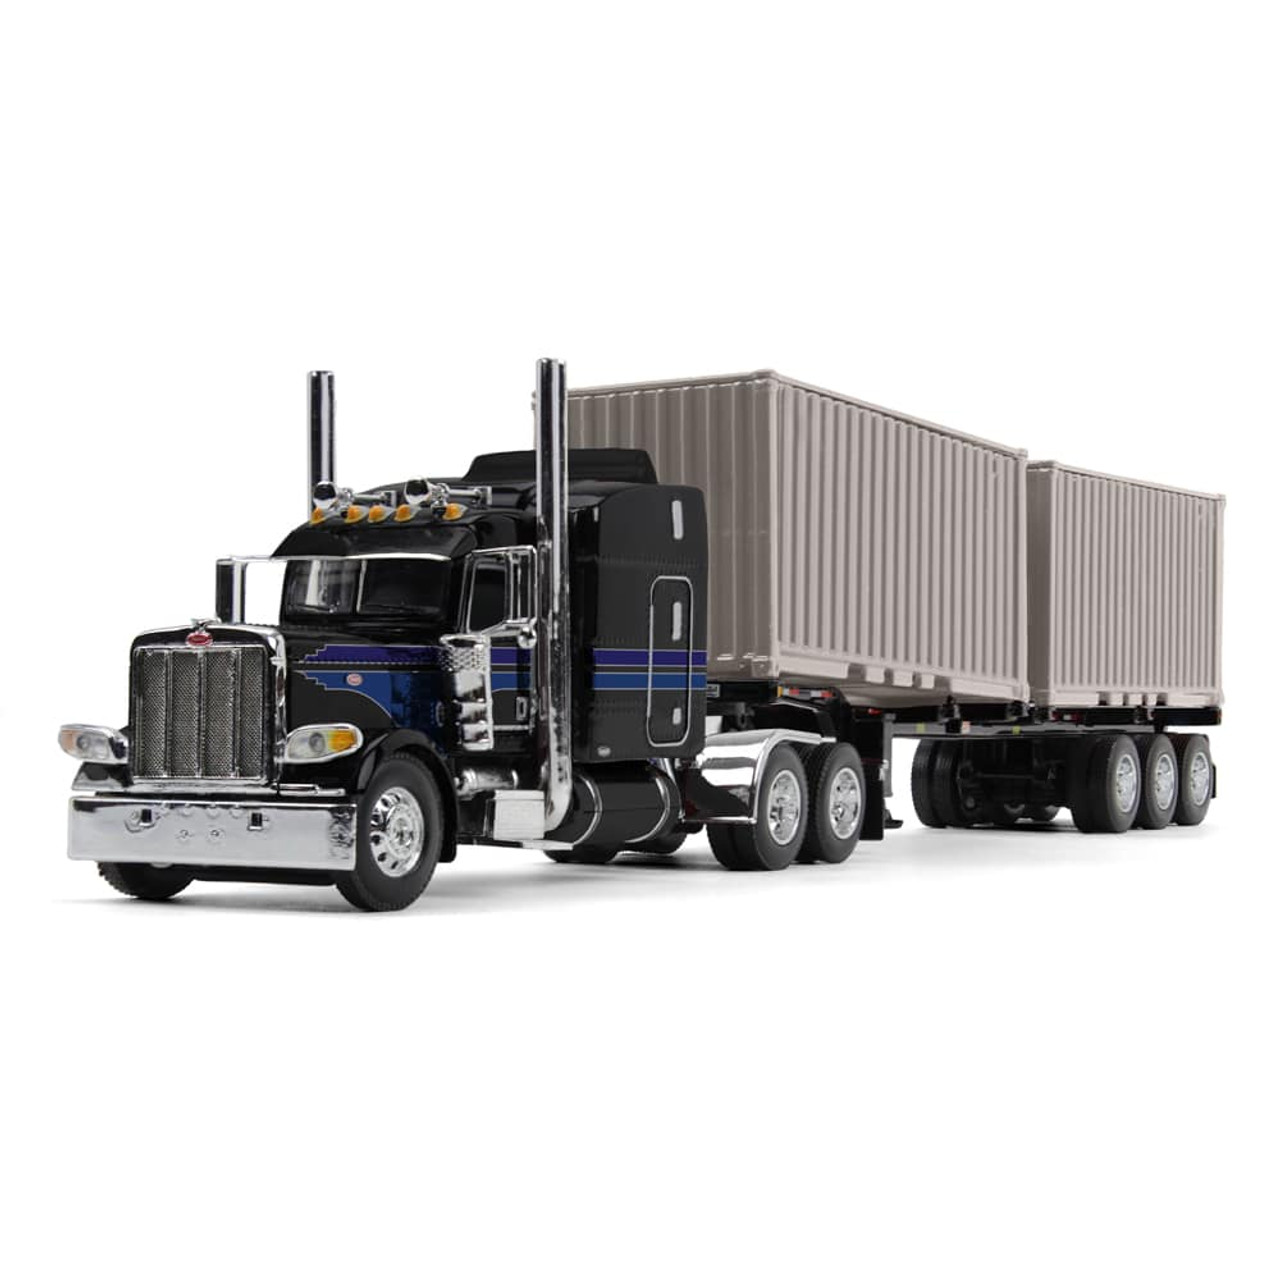 Pre-order, deposit only - 60-1887C - Black & Blue Peterbilt with Tri-axle container trailer & two 20' containers 389